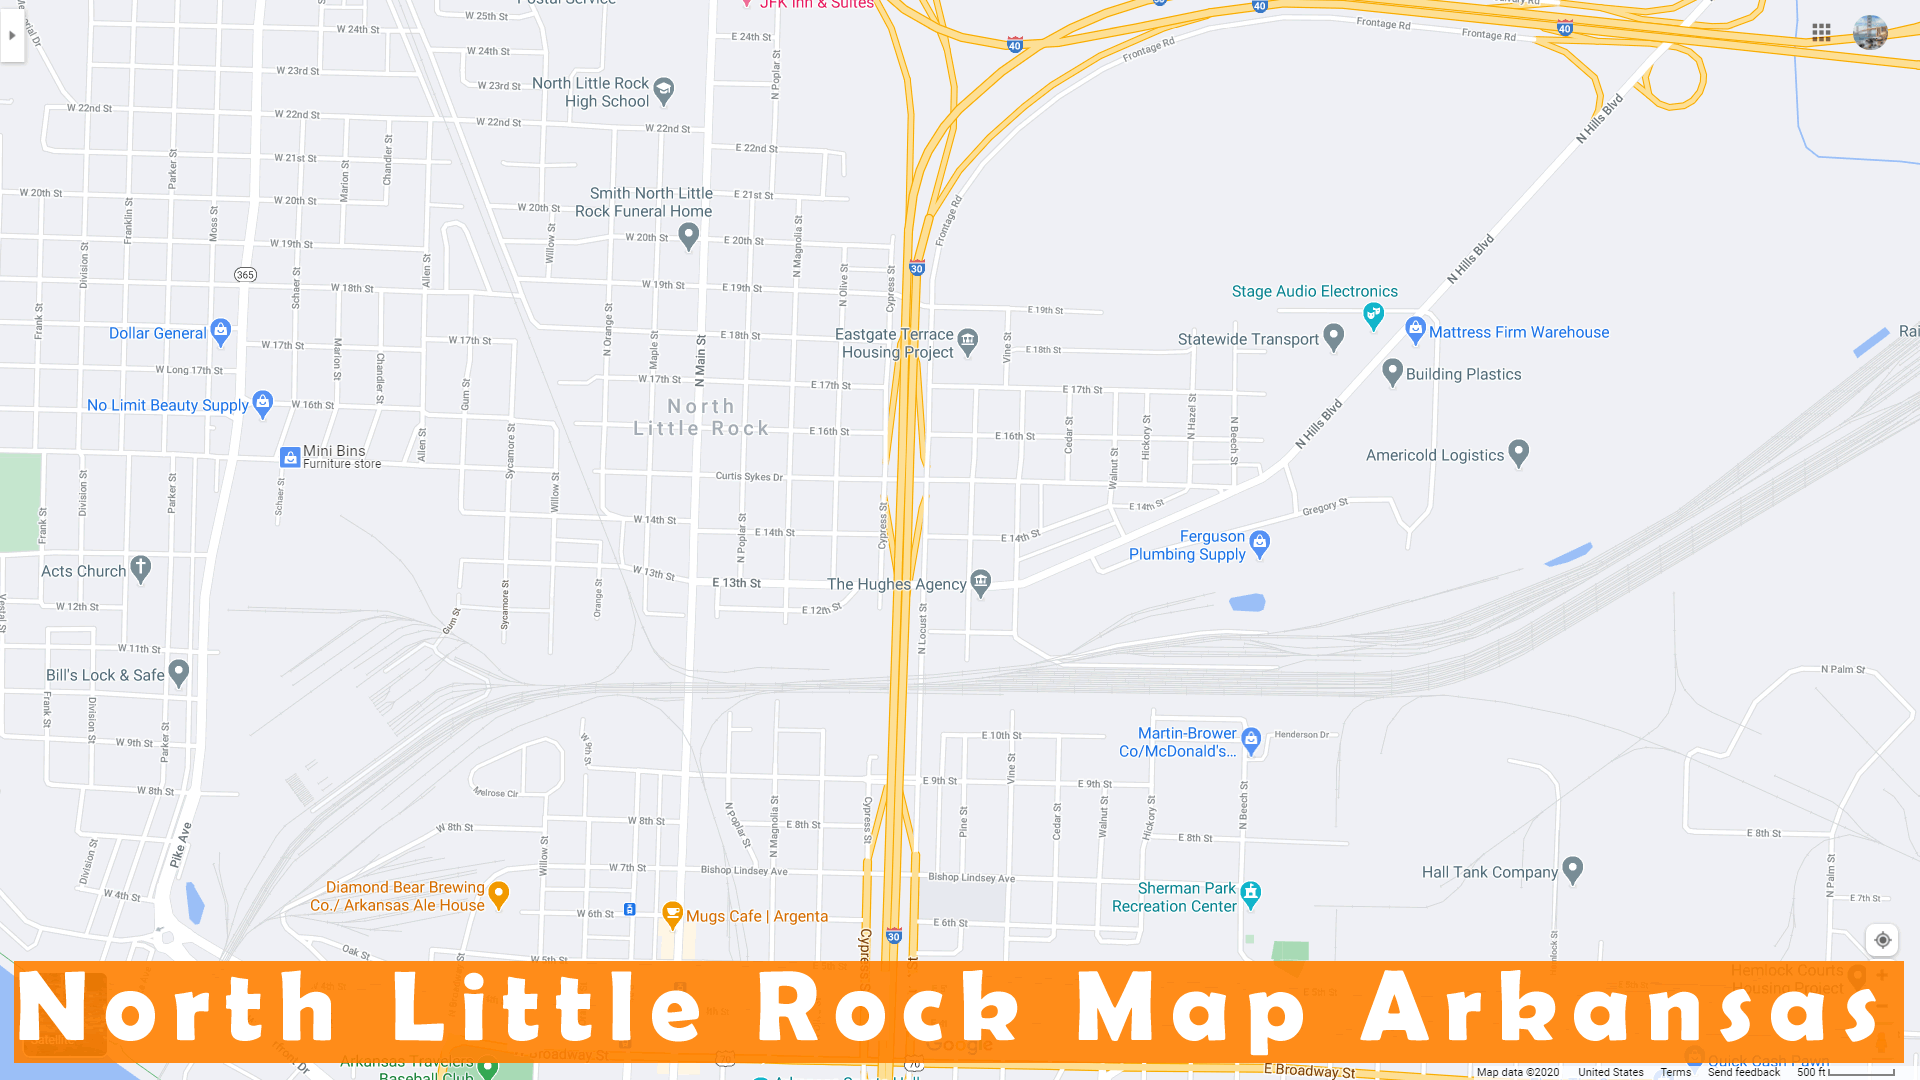 North Little Rock map